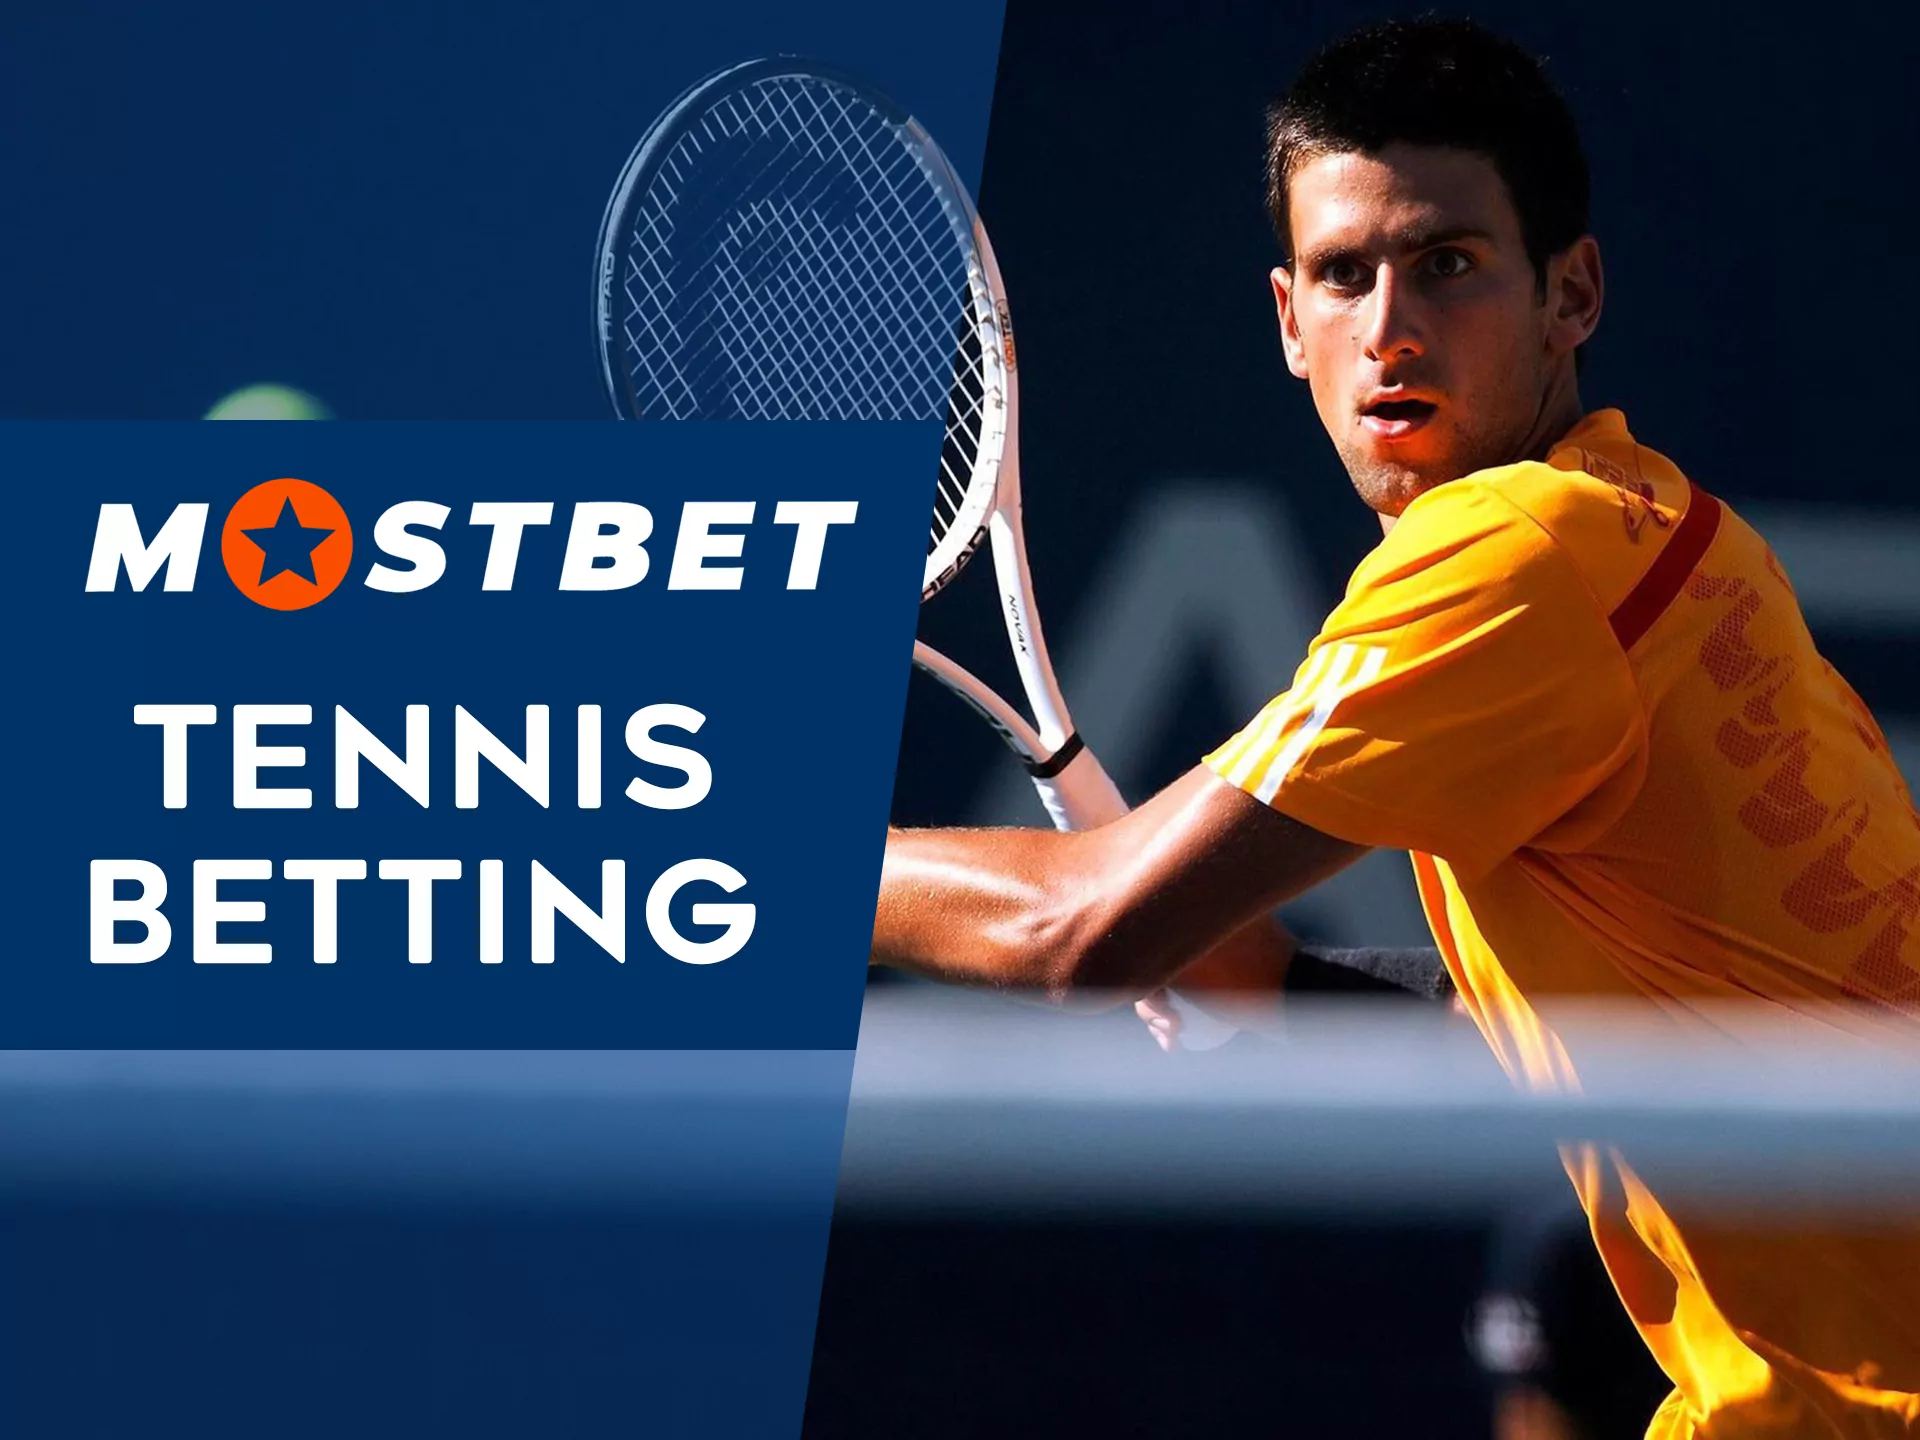 Tennis betting at Mostbet.